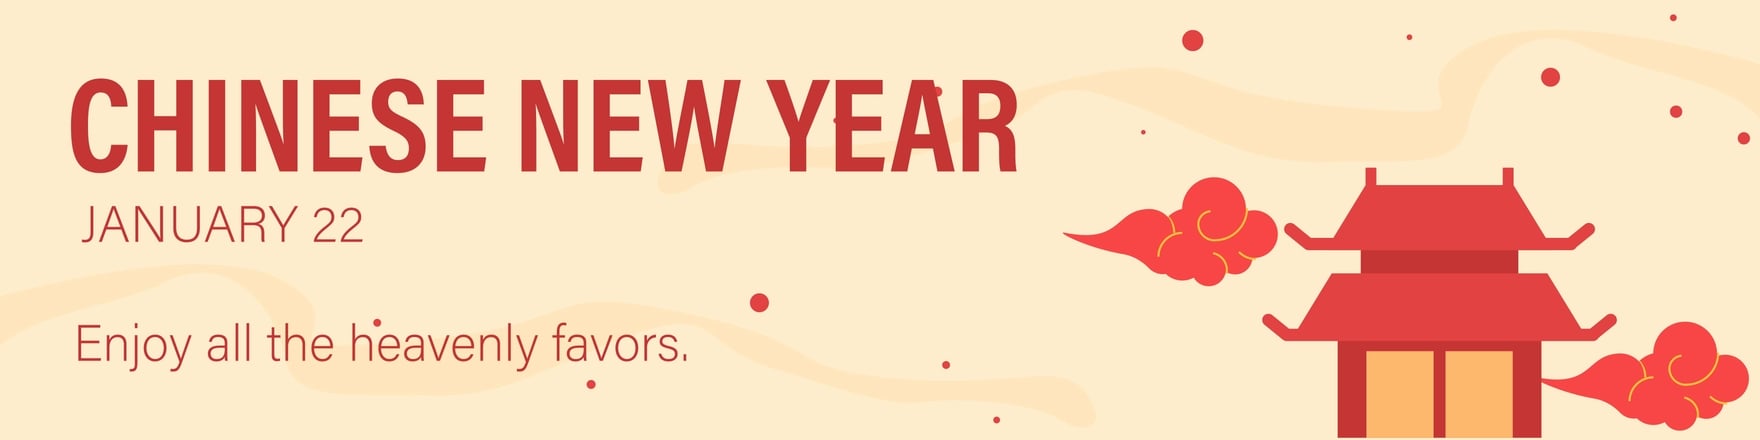 Chinese New Year Linkedin Banner Template